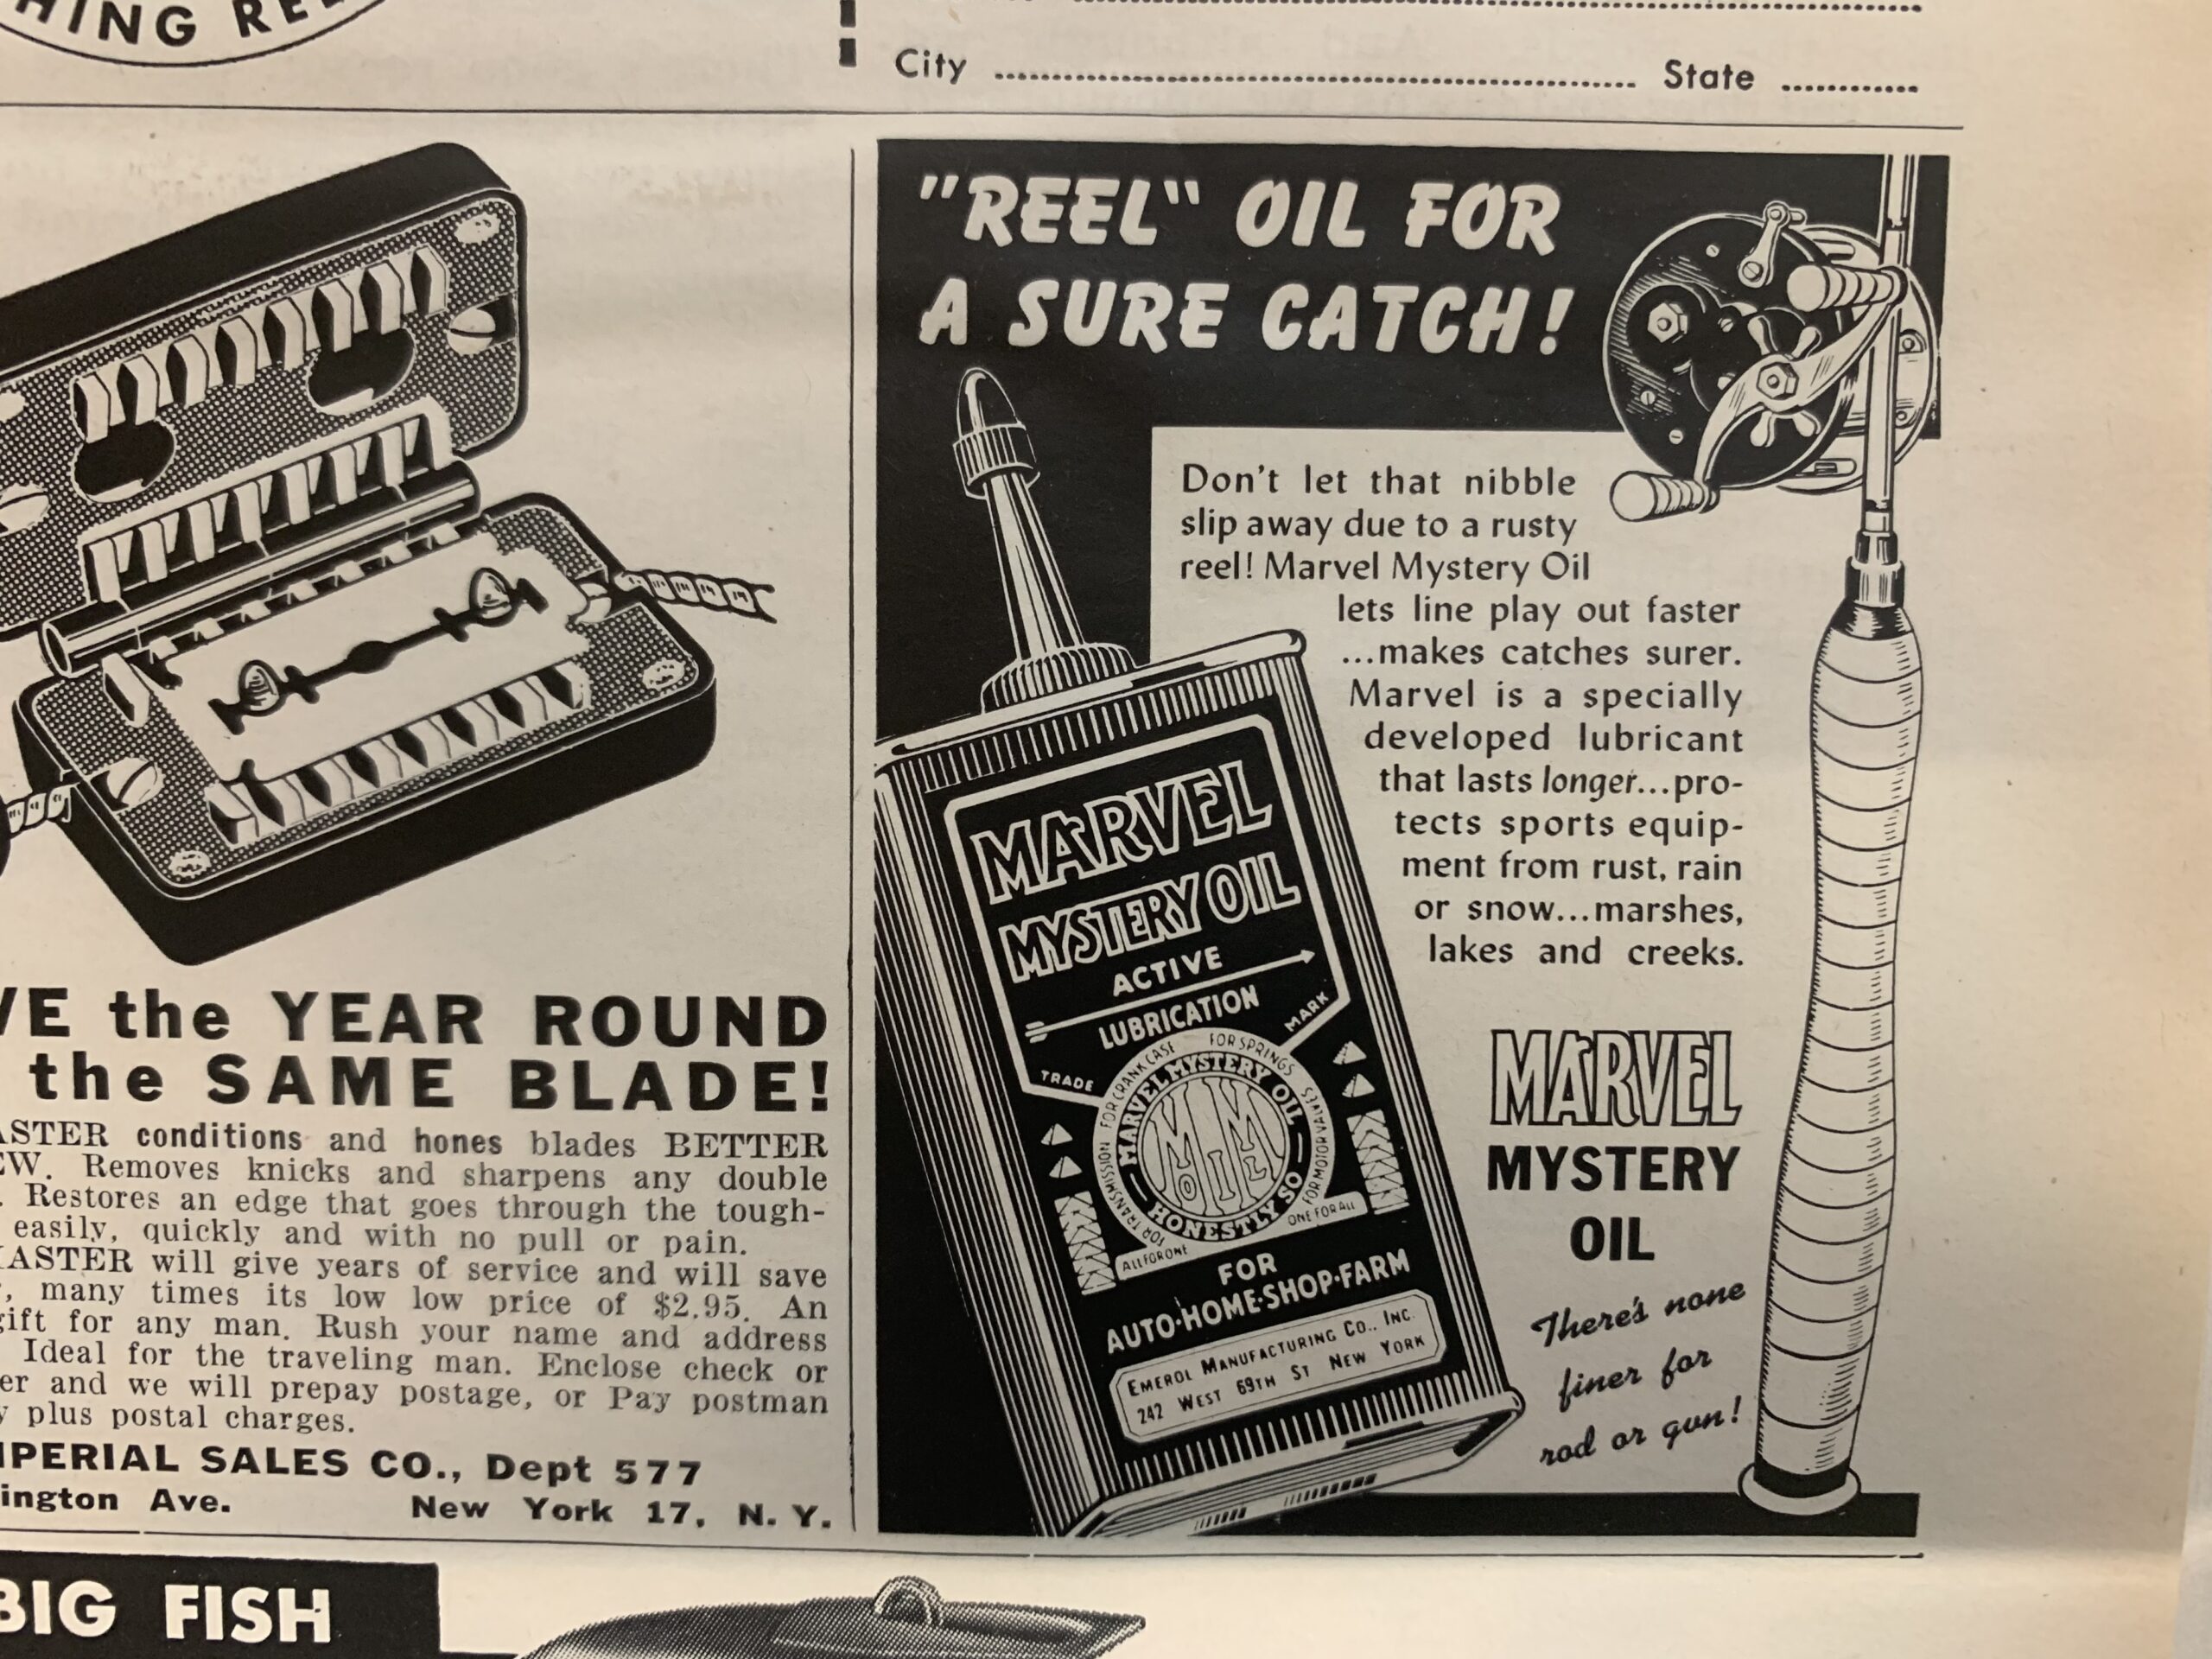 1952 Ad for Marvel Mystery Oil